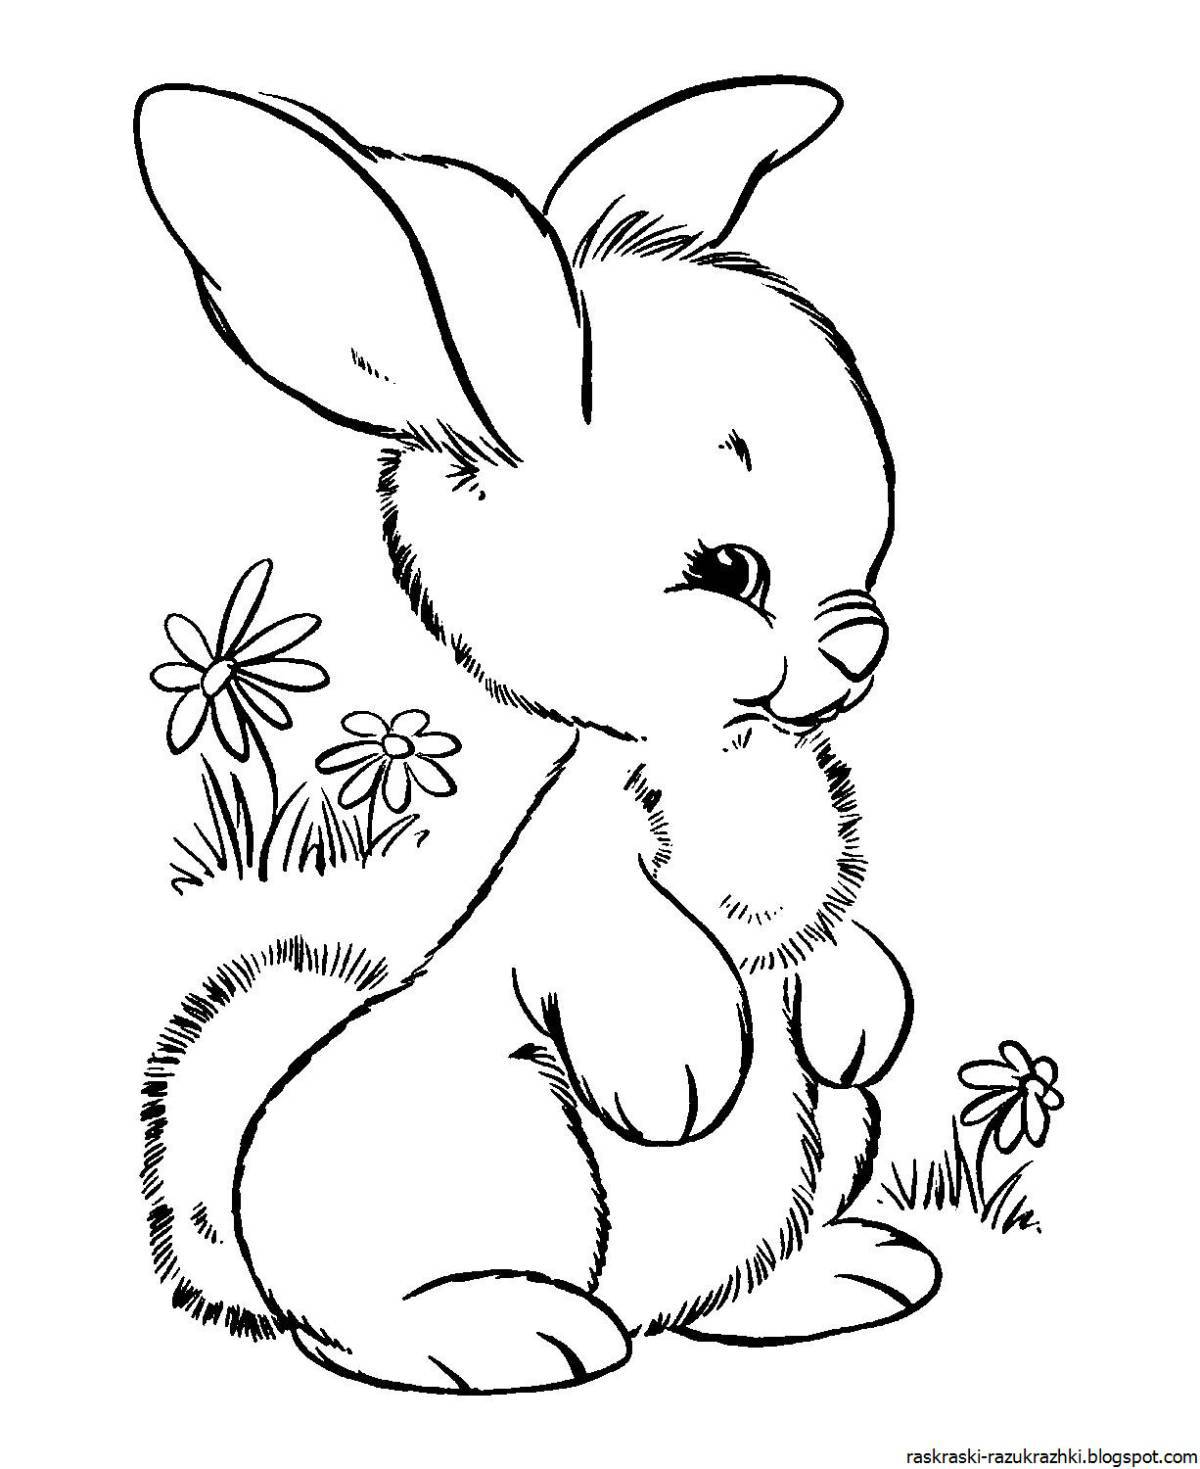 Shiny Bunny coloring book for kids